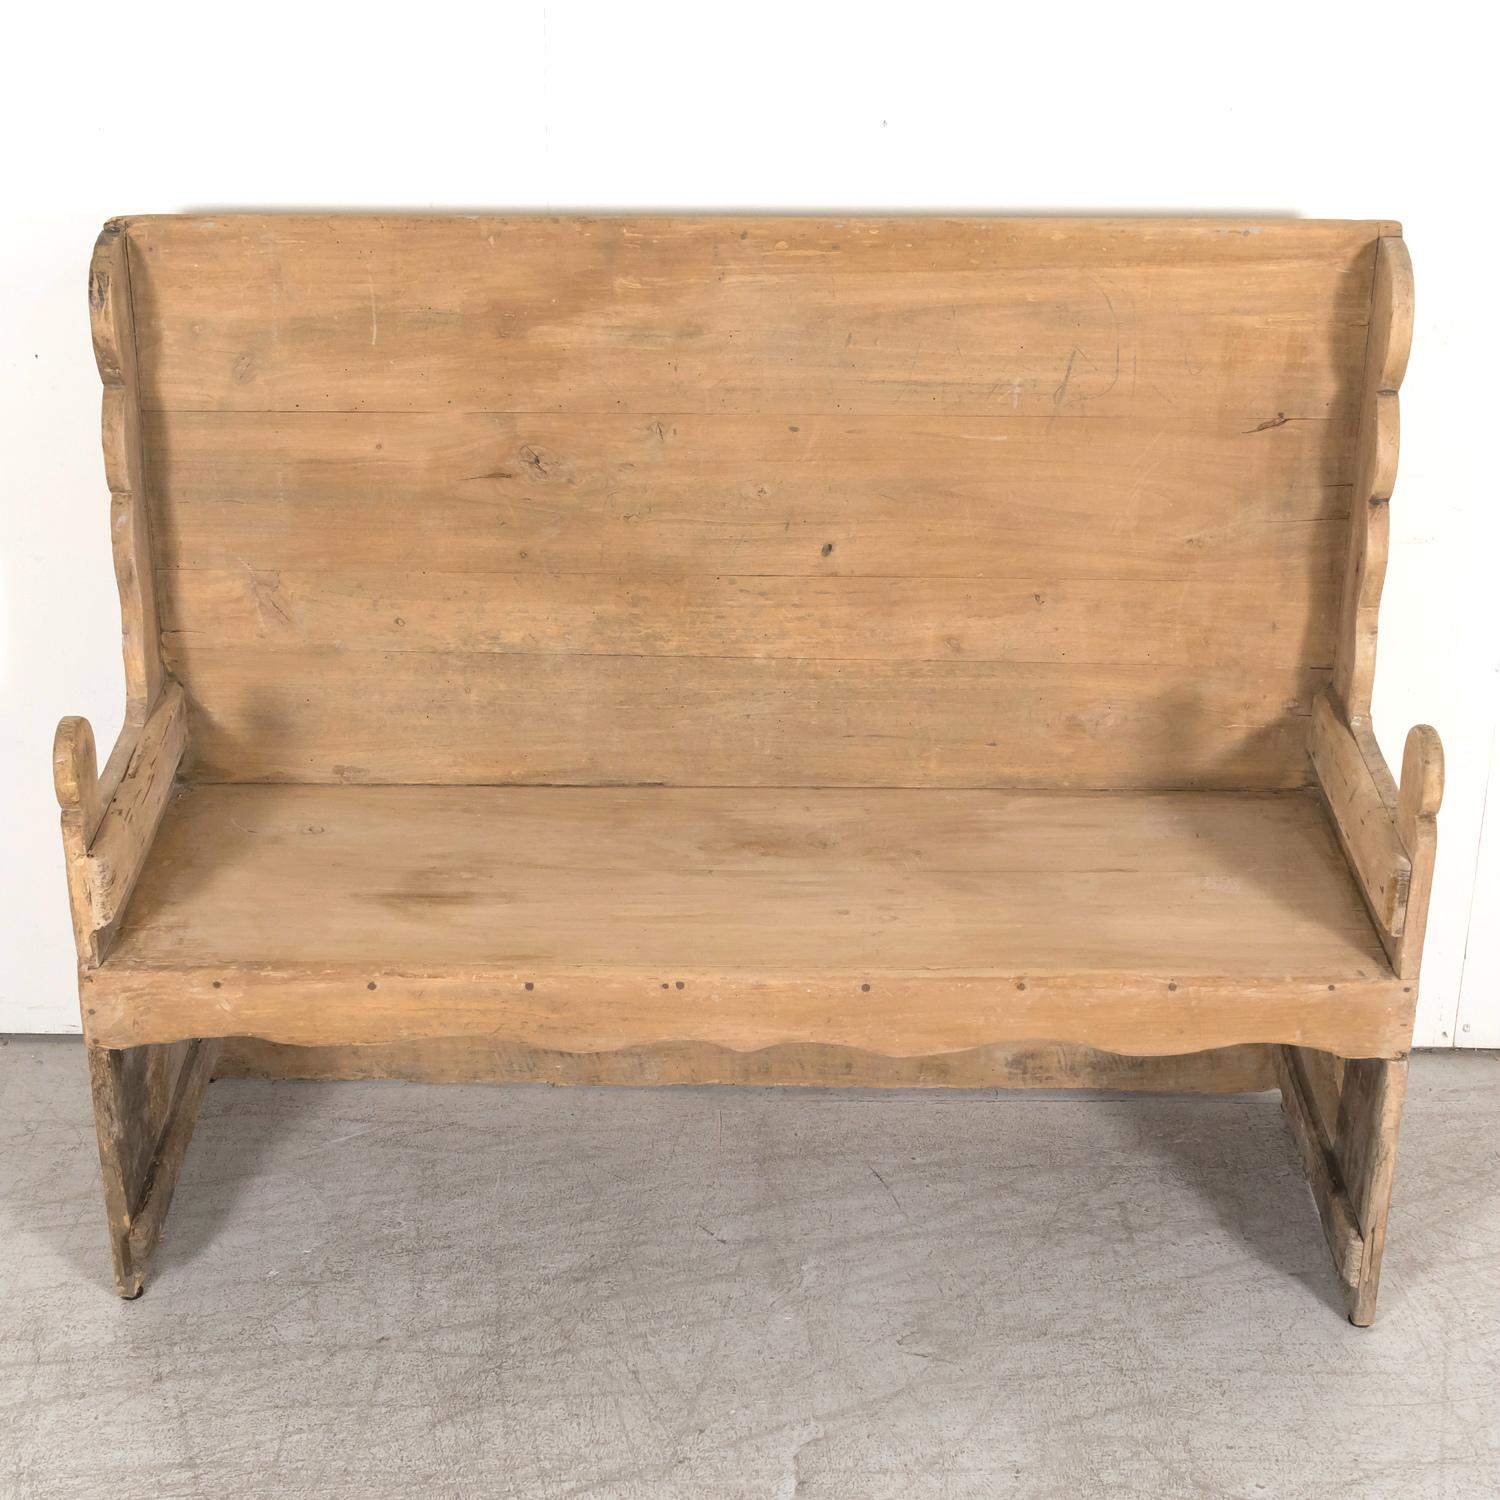 Pine Late 18th Century Carved Primitive Spanish Catalan Settle Bench  For Sale